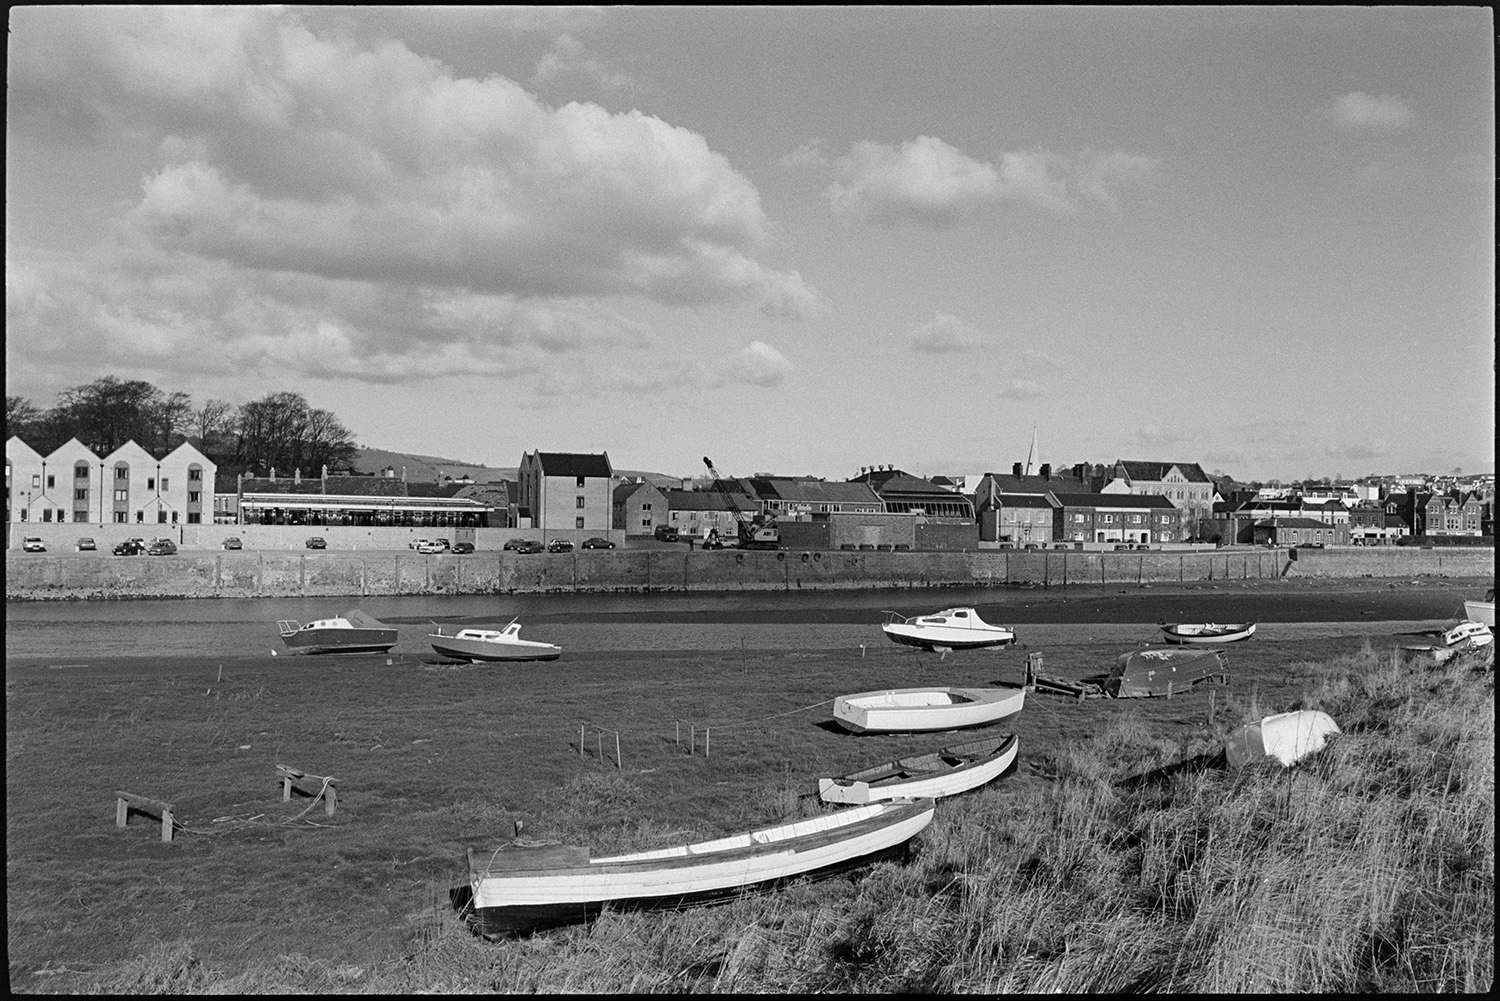 Barges and small boats on river bridge in background.
[Small boats and motor launches on the mud banks of the River Taw, with the buildings of Barnstaple on the other side of the river.]